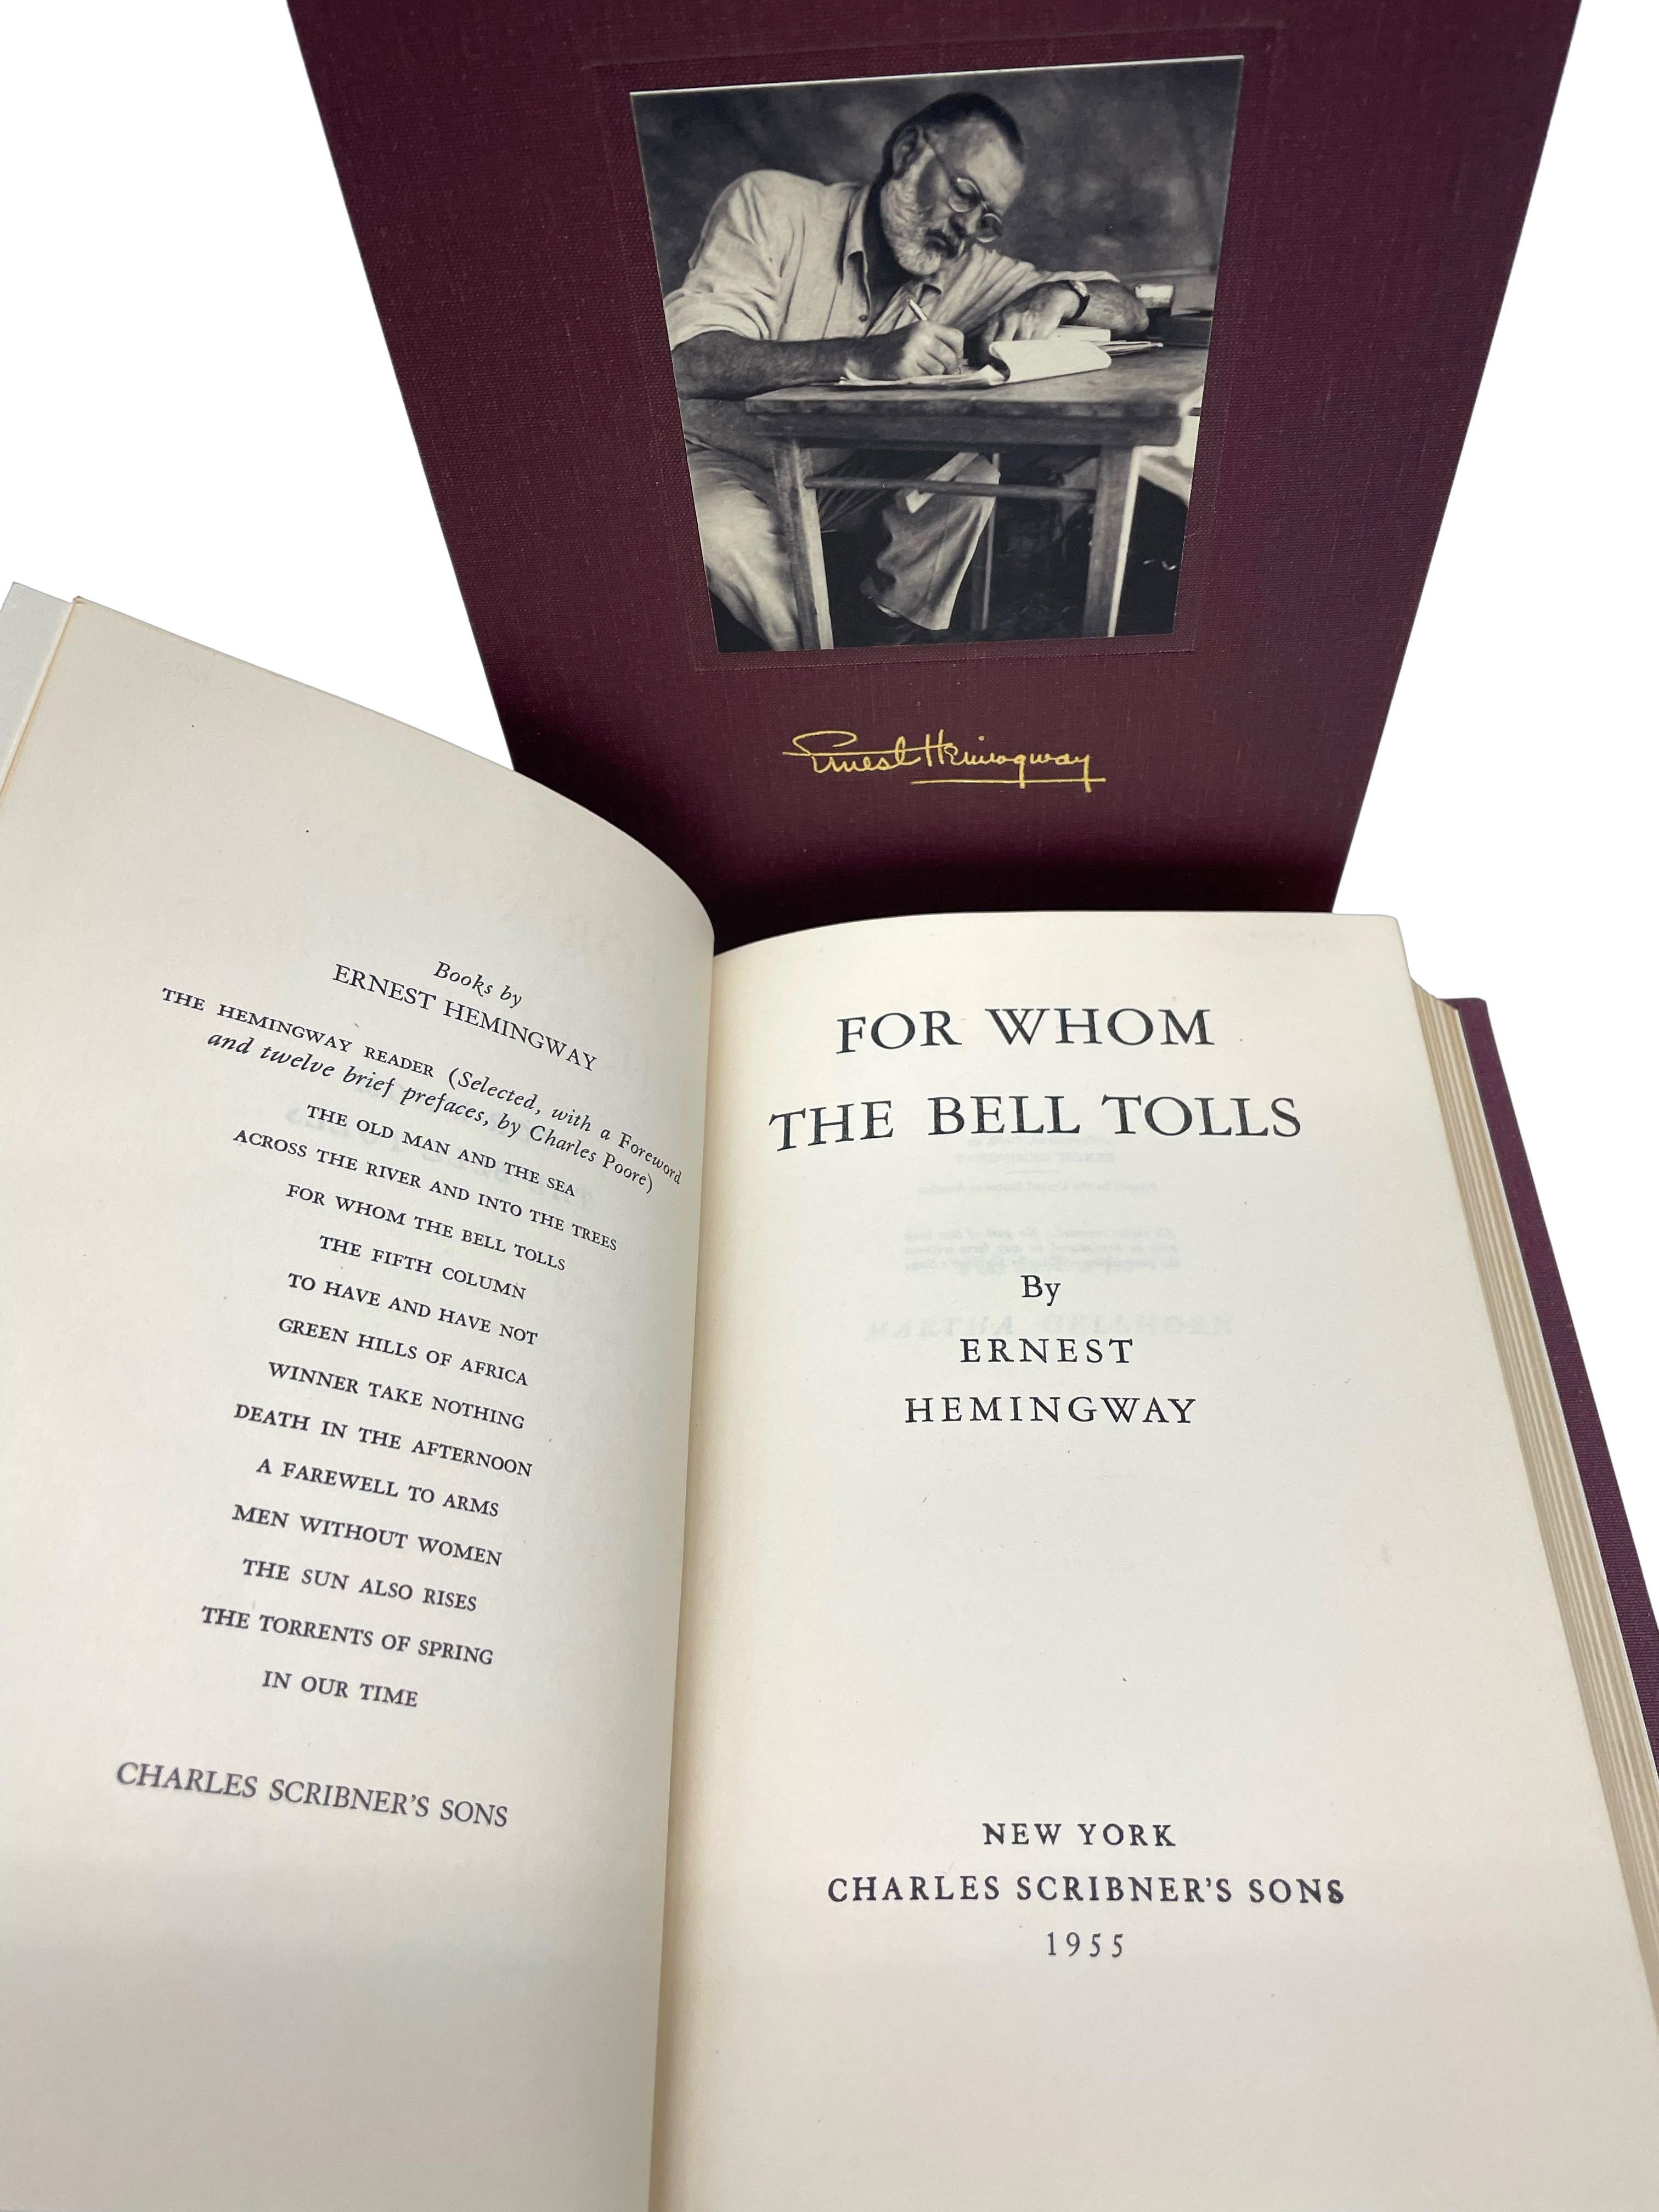 Hemingway, Ernest. For Whom The Bell Tolls. New York: Charles Schribner’s Sons, 1955. Later edition. Signed and inscribed by Hemingway on front free endpaper. Octavo. Rebound in ¼ black leather and burgundy cloth boards with gilt tooling to the